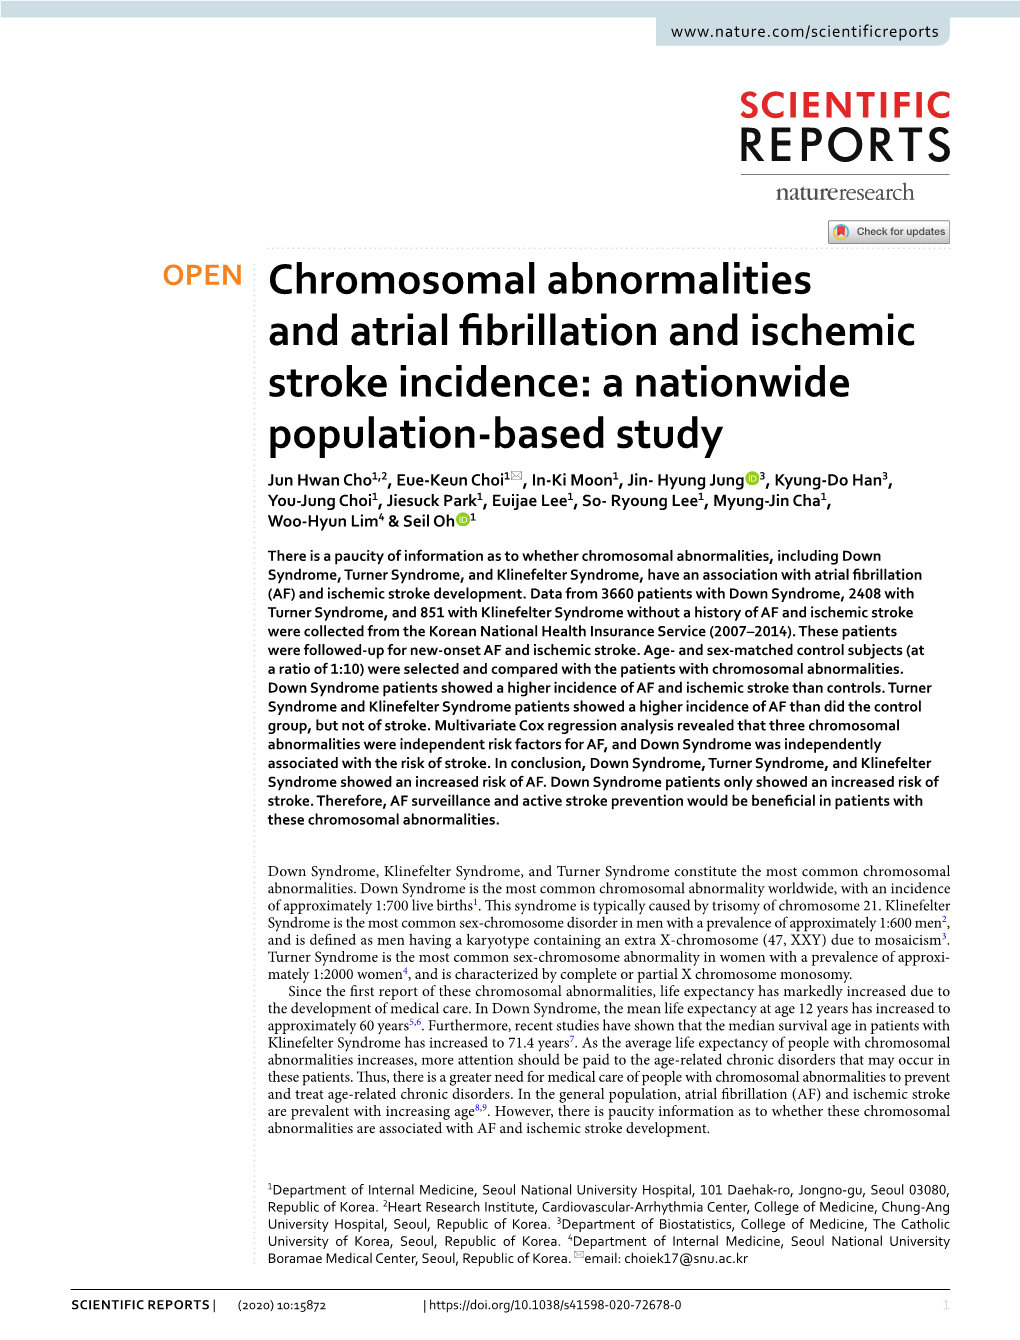 Chromosomal Abnormalities and Atrial Fibrillation and Ischemic